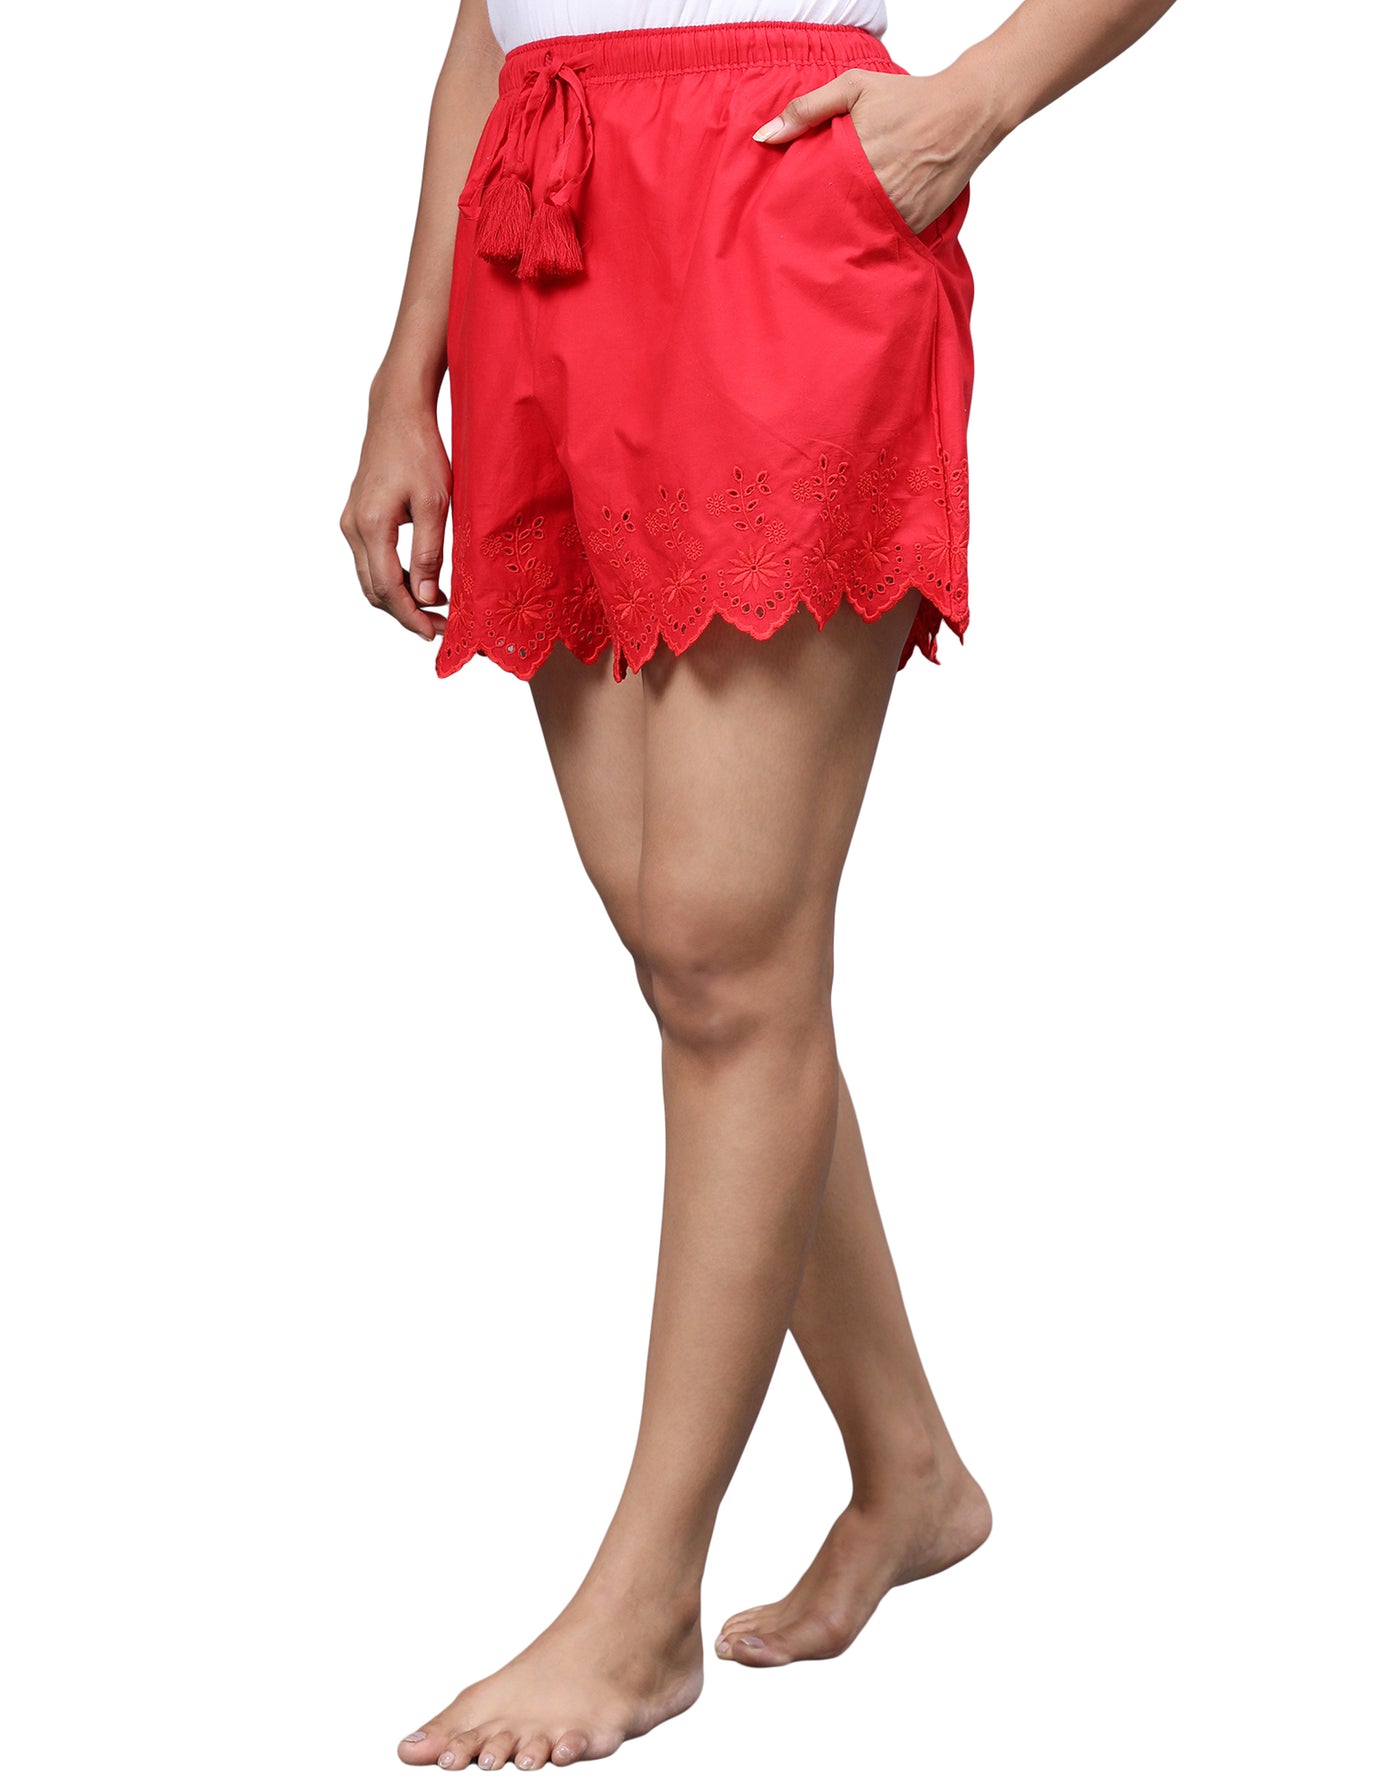 Lounge Shorts for Women-Red Embroidered